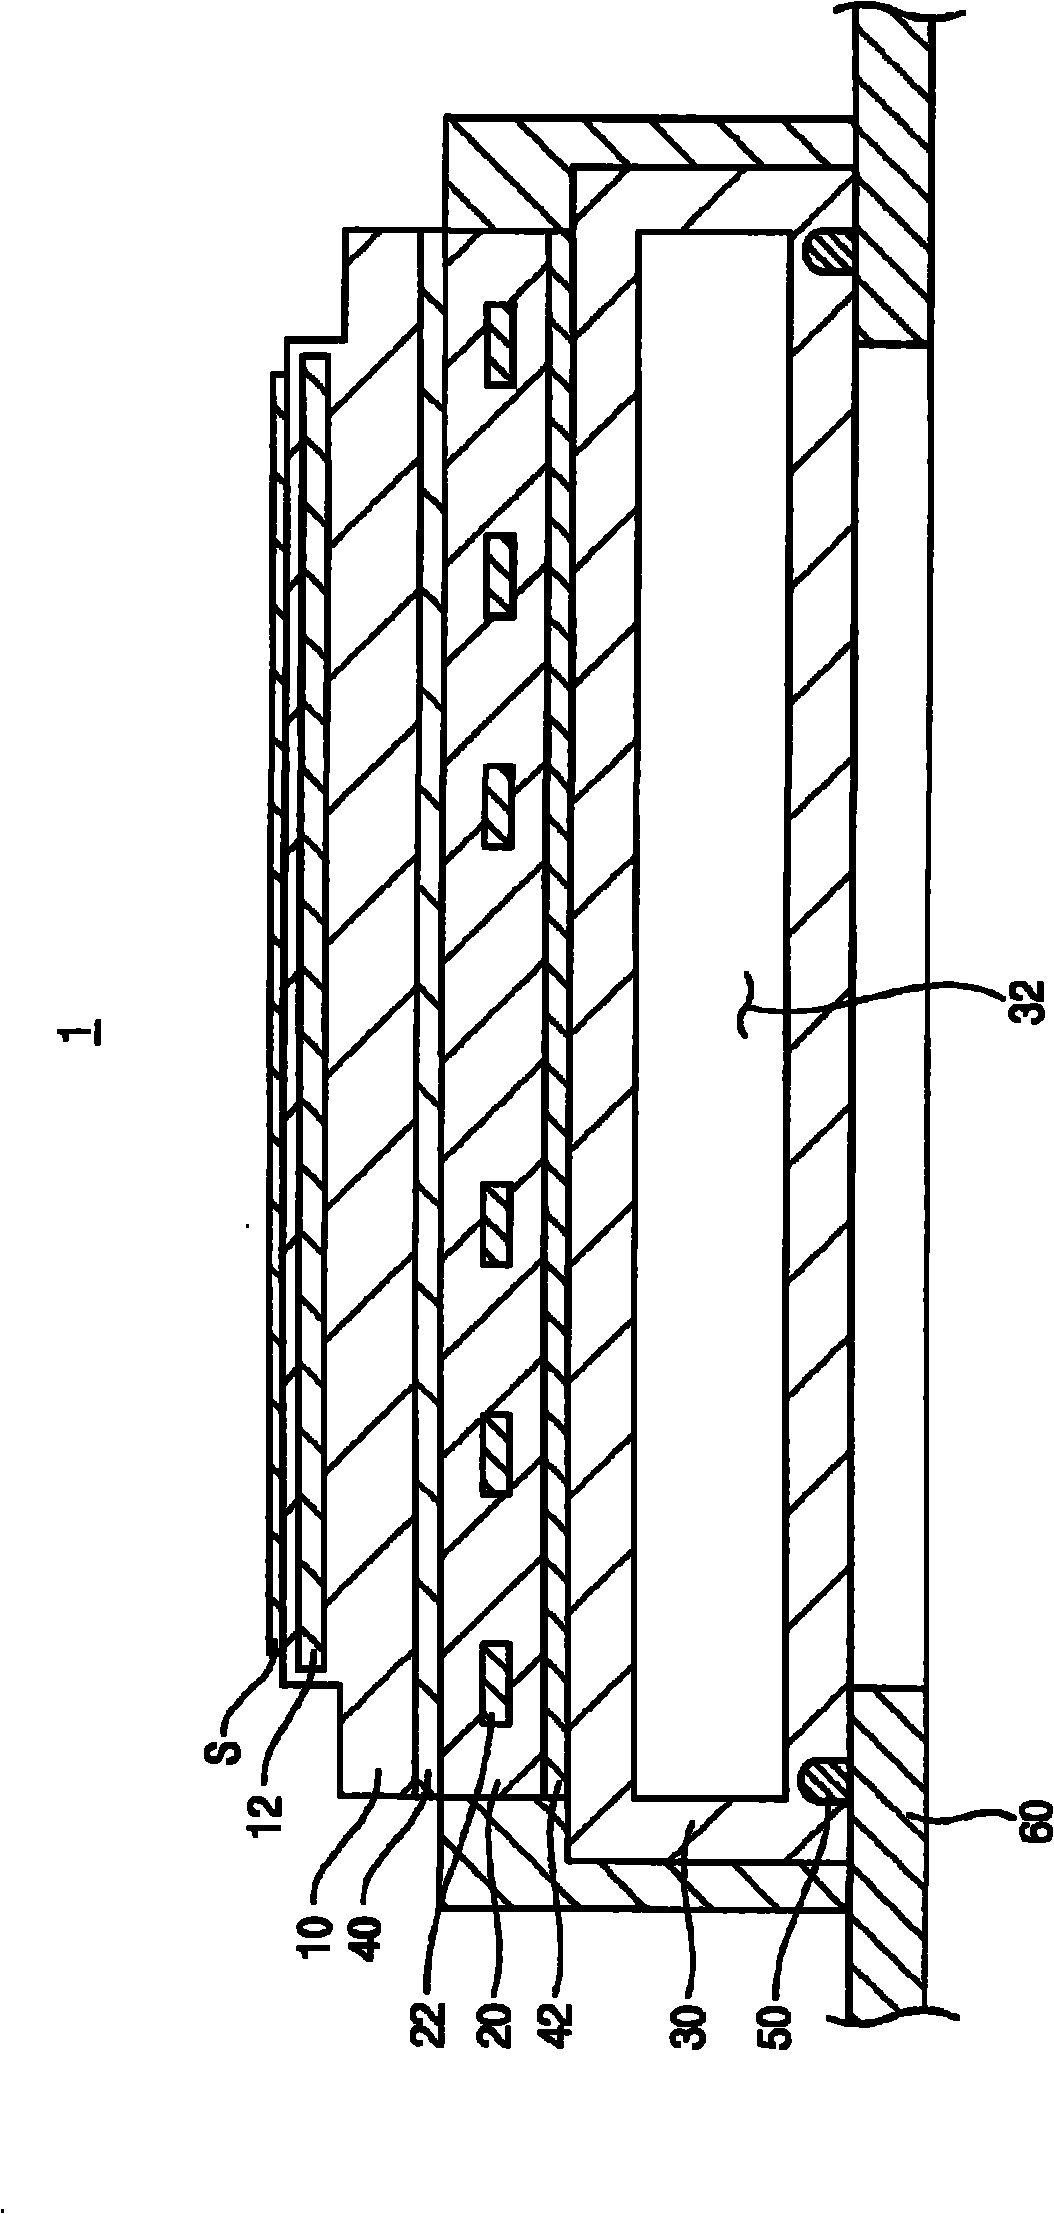 Unit for supporting a substrate and apparatus for processing a substrate having the same